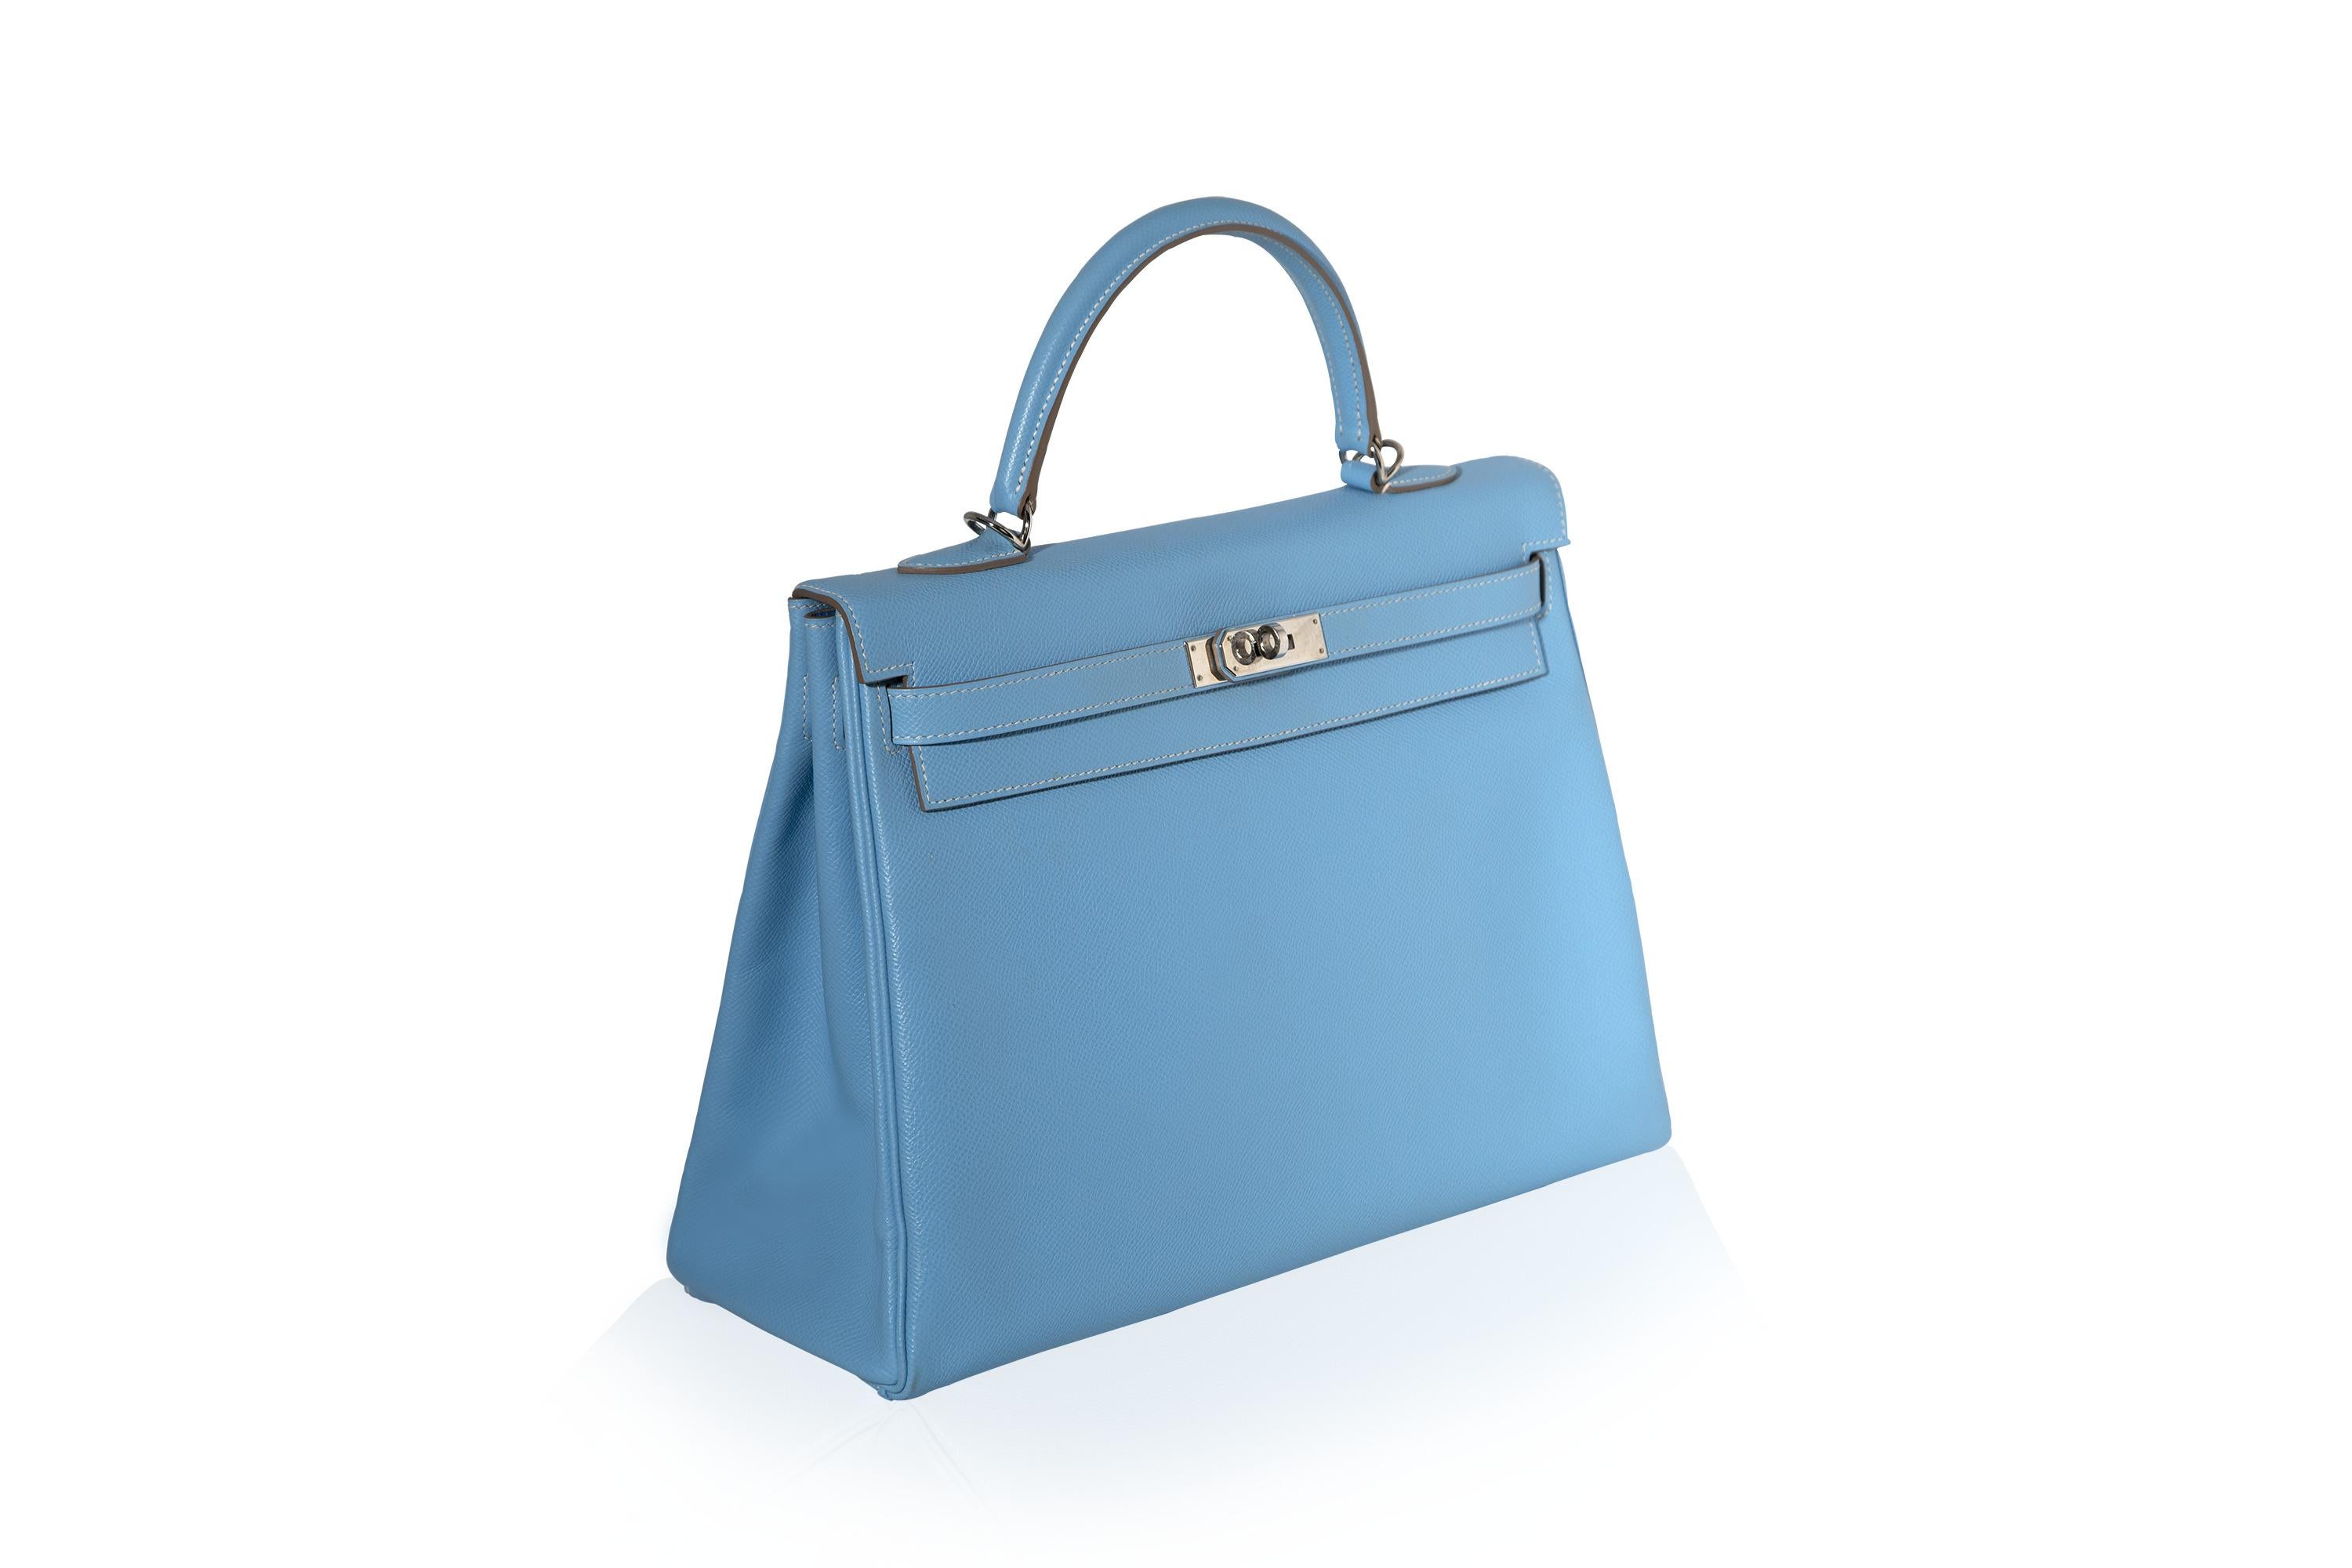 One of the most sought-after Hermès styles, this pre-owned Kelly 35 Celeste Blue bag has been crafted from Epsom leather. A true testament to the quality of the house's craftsmanship.

•Top handle 
•Palladium-tone hardware
•Turn-lock